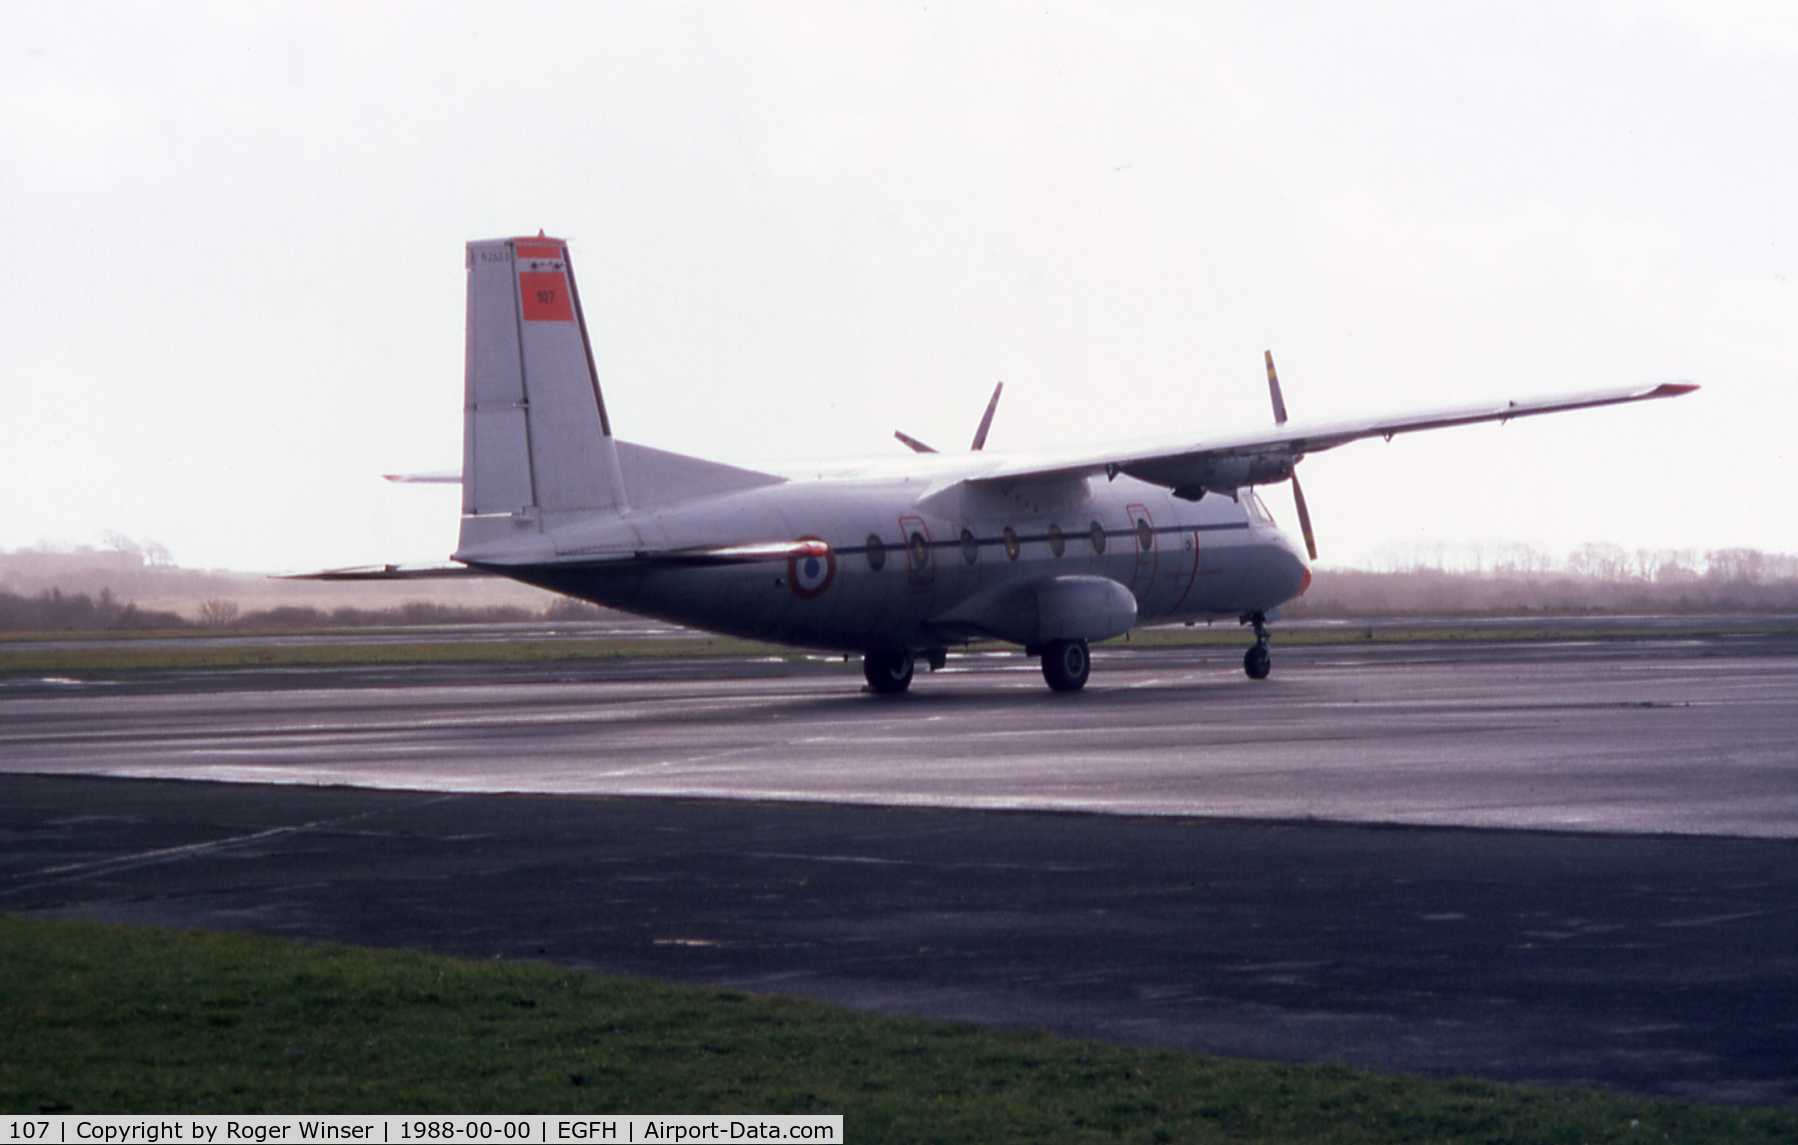 107, 1975 Aerospatiale N-262D-51 Fregate C/N 107, Fregate coded AX of the French Air Force visiting Swansea Airport in 1988?